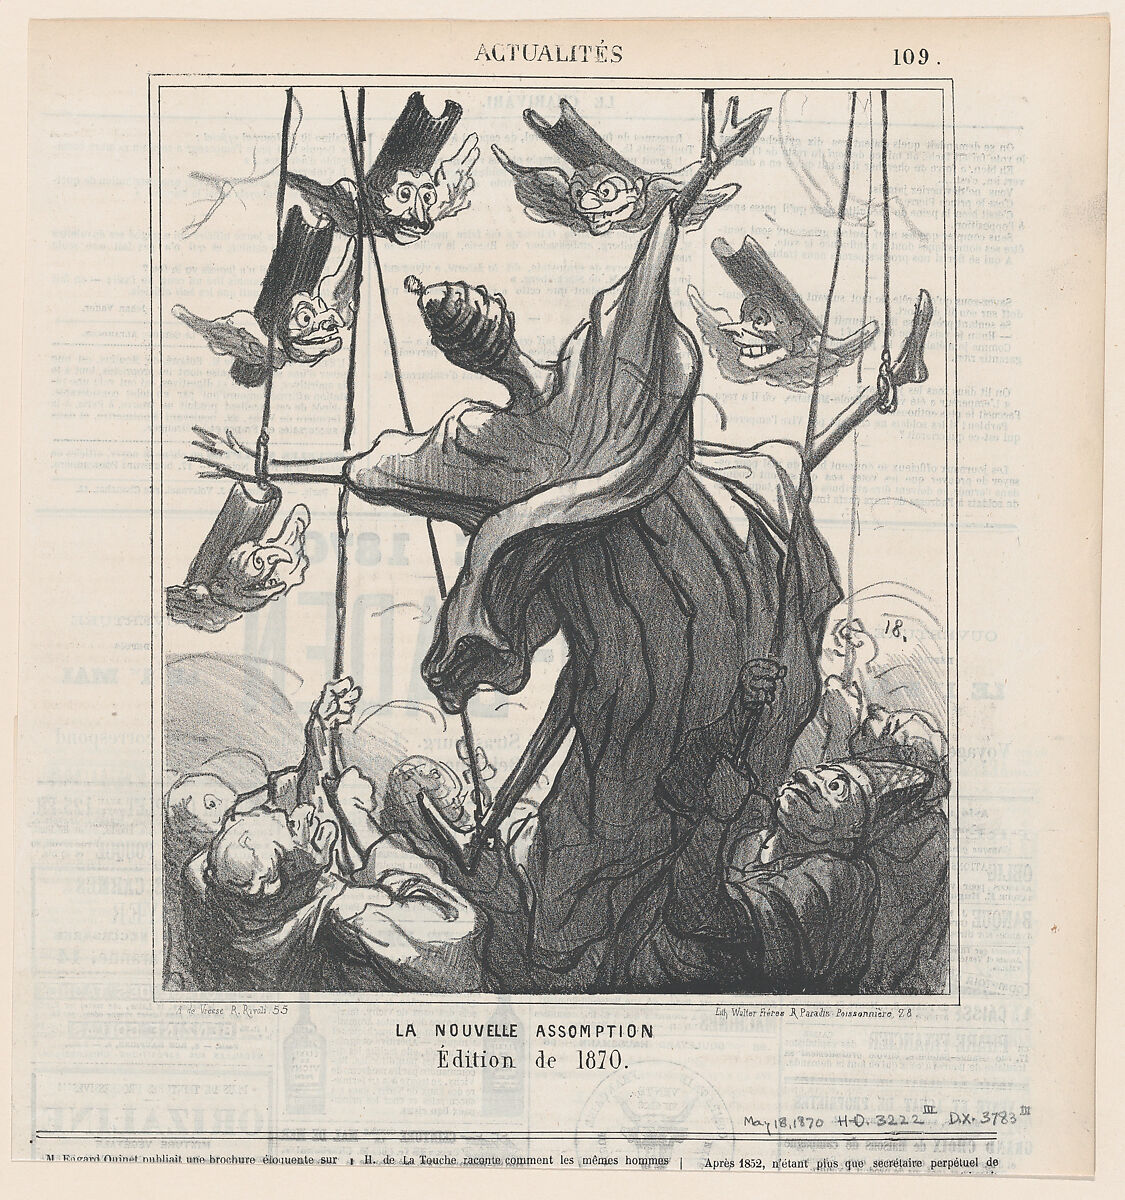 Honoré Daumier | The new assumption, 1870 edition, from 'News of the ...